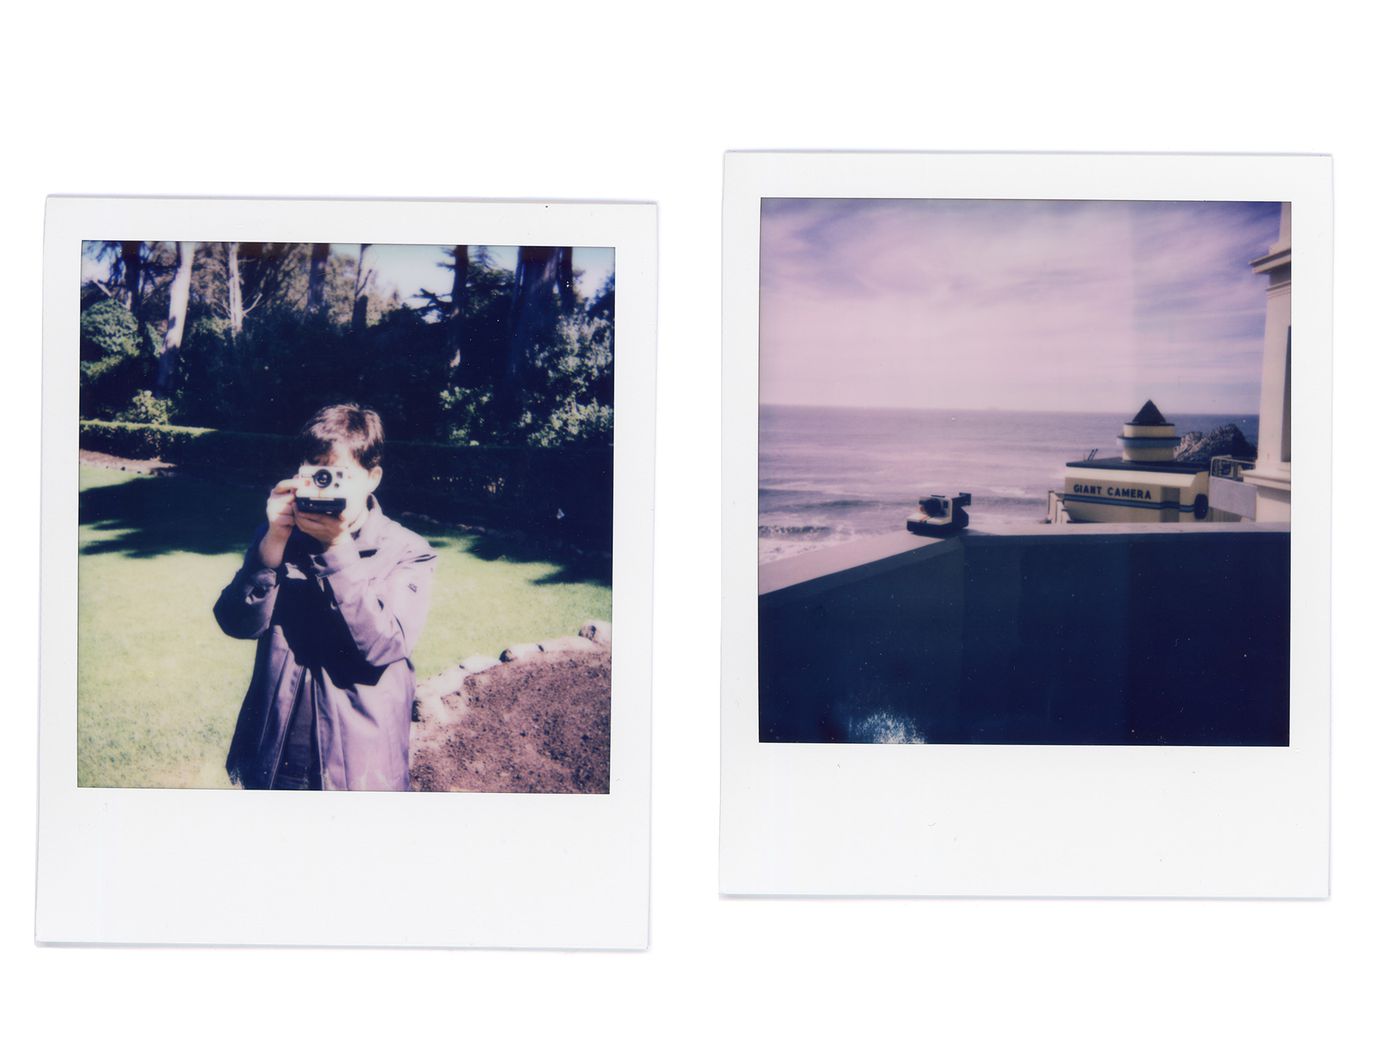 Two more real, unedited Polaroids we shot of the Lego Polaroid with a Polaroid OneStep SX-70 — the camera it’s based on. One is me, holding the Lego Polaroid up to my eye facing the camera. The other is the Polaroid in its native habitat (on a railing next to the Camera Obscura near San Francisco’s Cliff House, with the ocean in the background).